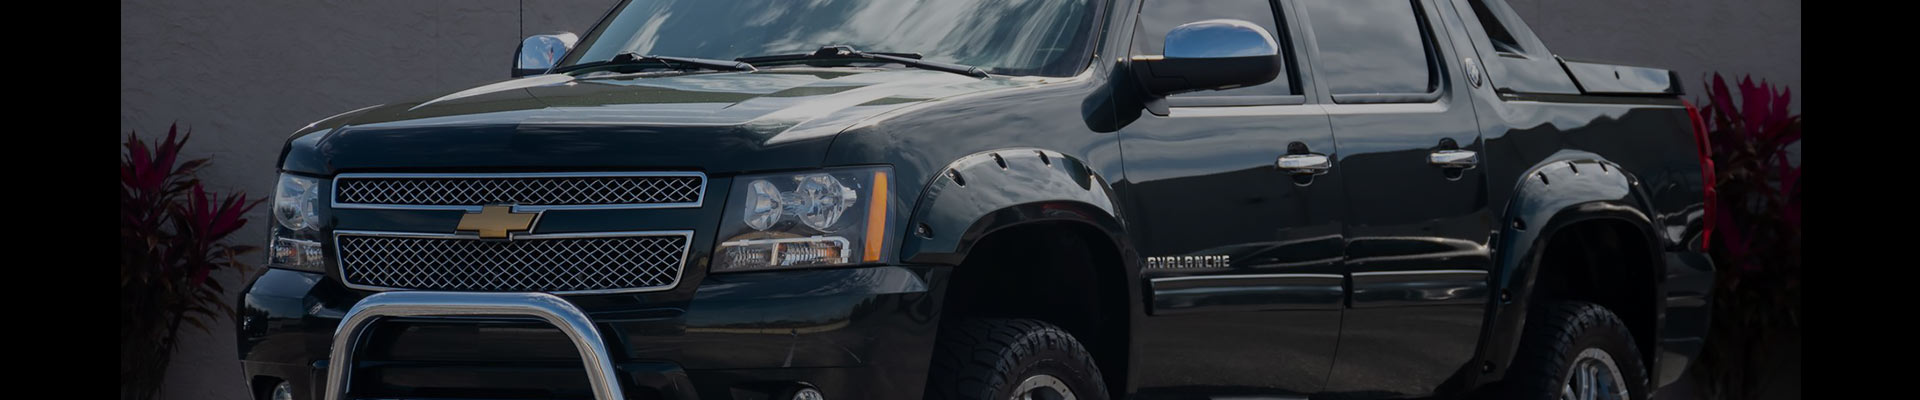 Shop Genuine OE Parts for Chevrolet Avalanche